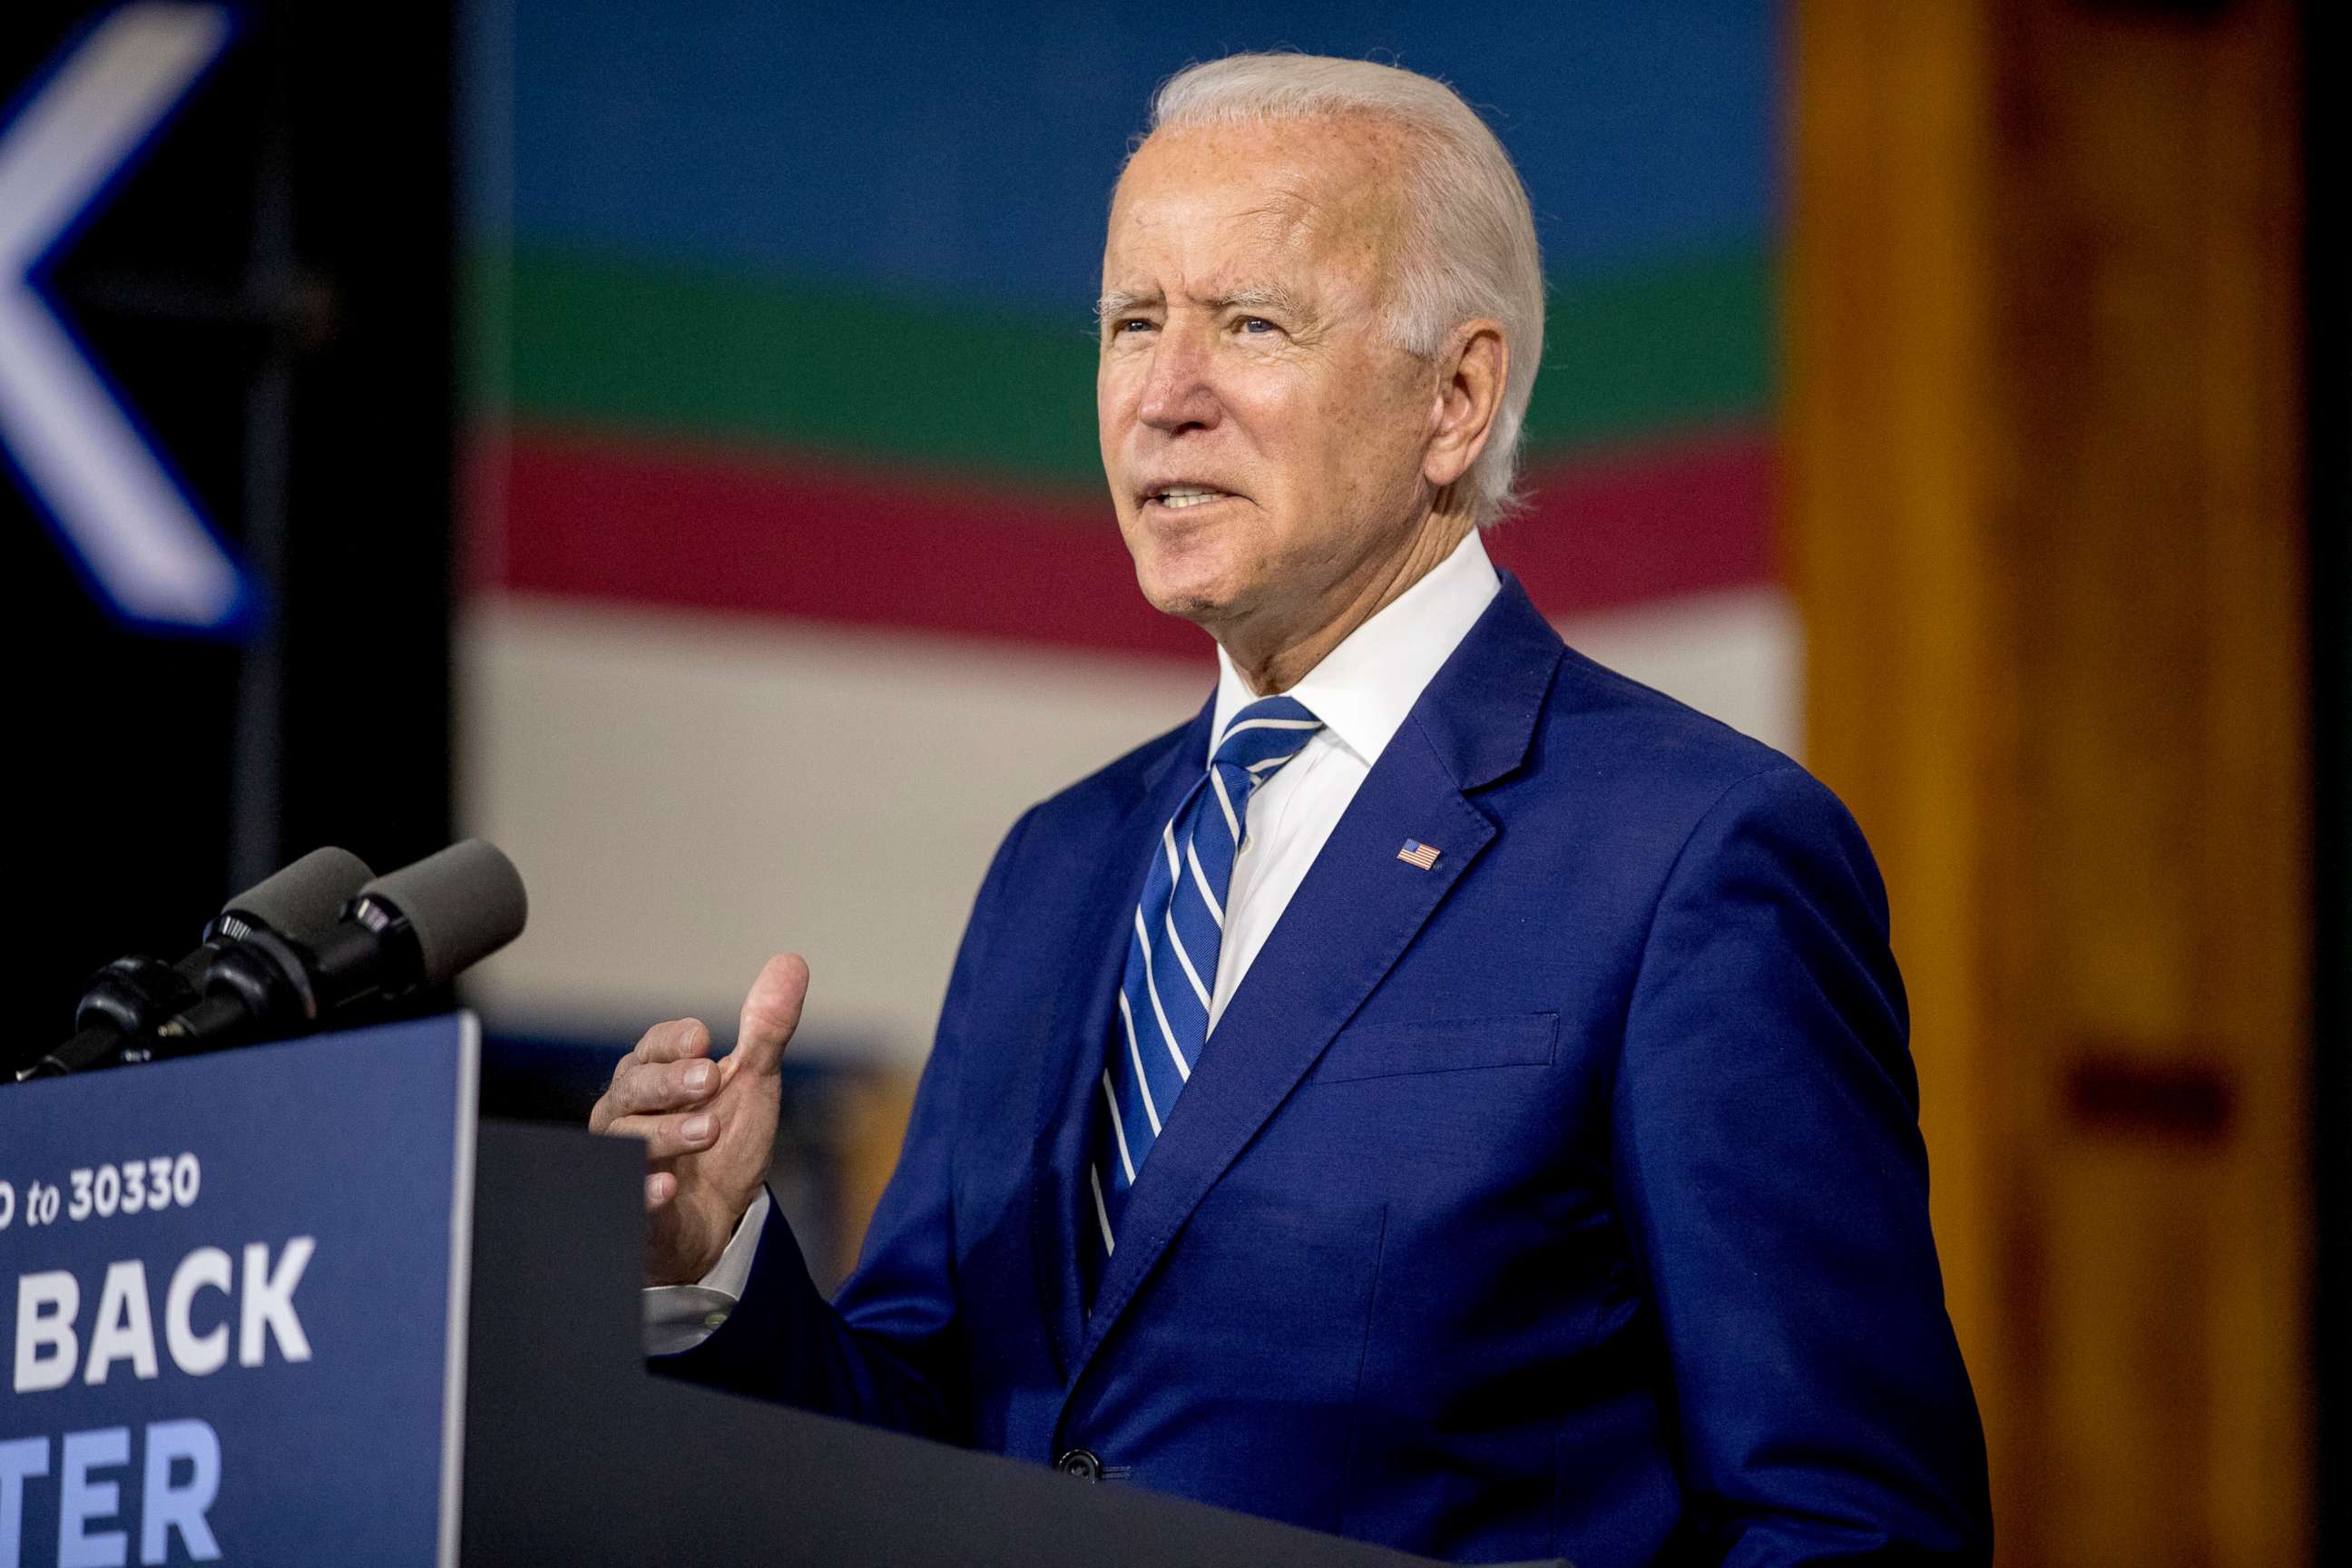 PHOTO: Democratic presidential candidate former Vice President Joe Biden speaks at a campaign event at the Colonial Early Education Program at the Colwyck Training Center, Tuesday, July 21, 2020 in New Castle, Del.